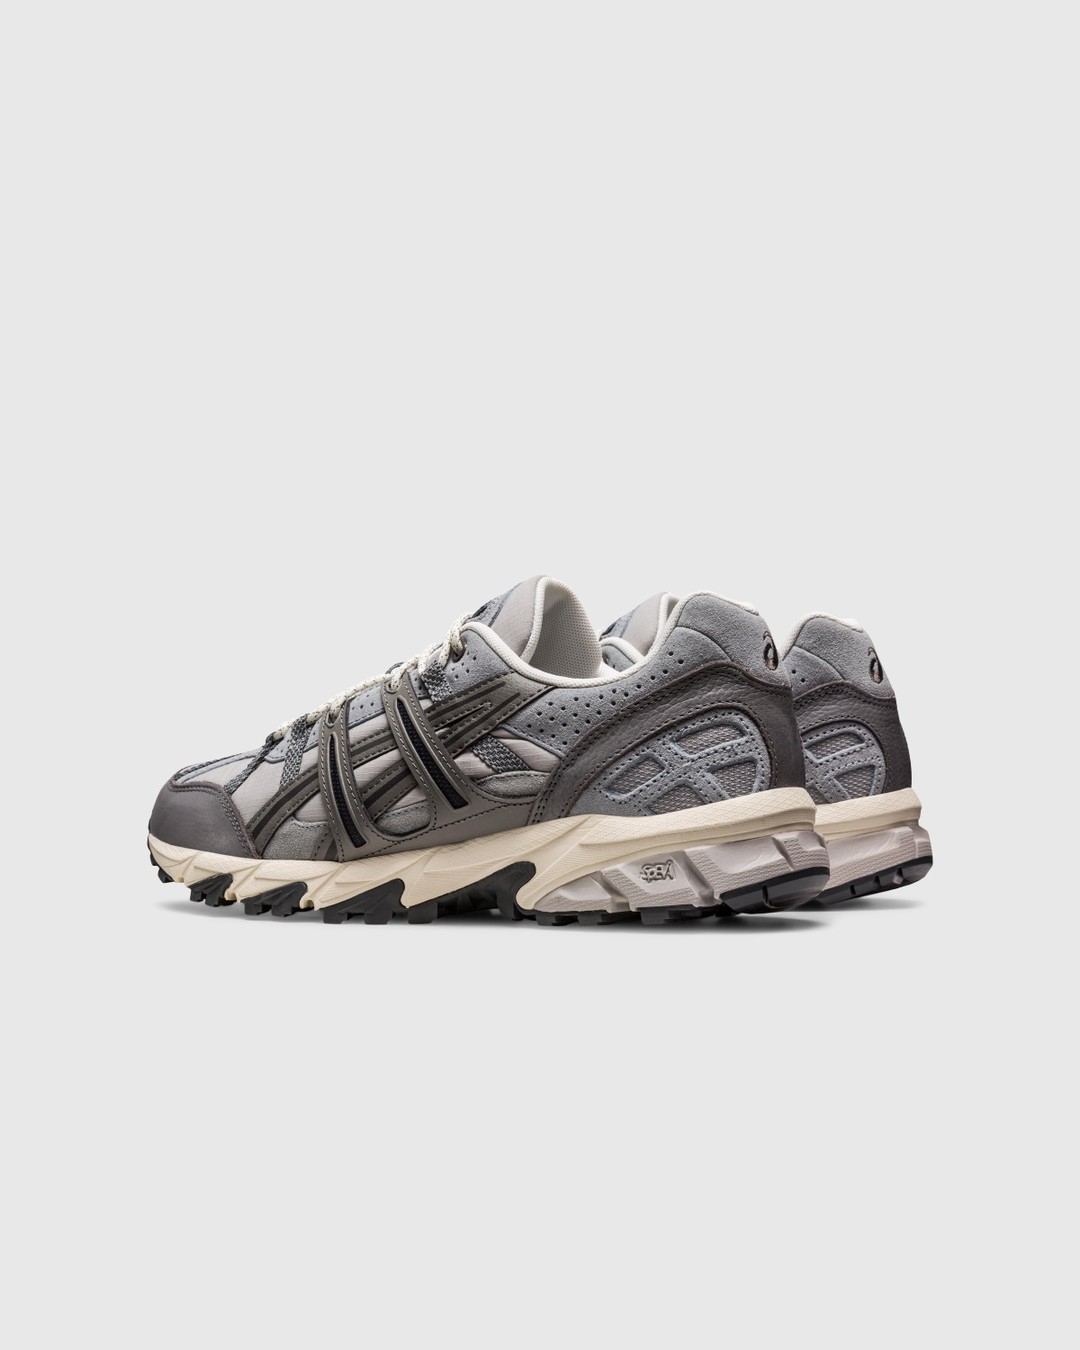 asics – GEL-SONOMA 15-50 Oyster Grey/Clay Grey - Sneakers - Grey - Image 4